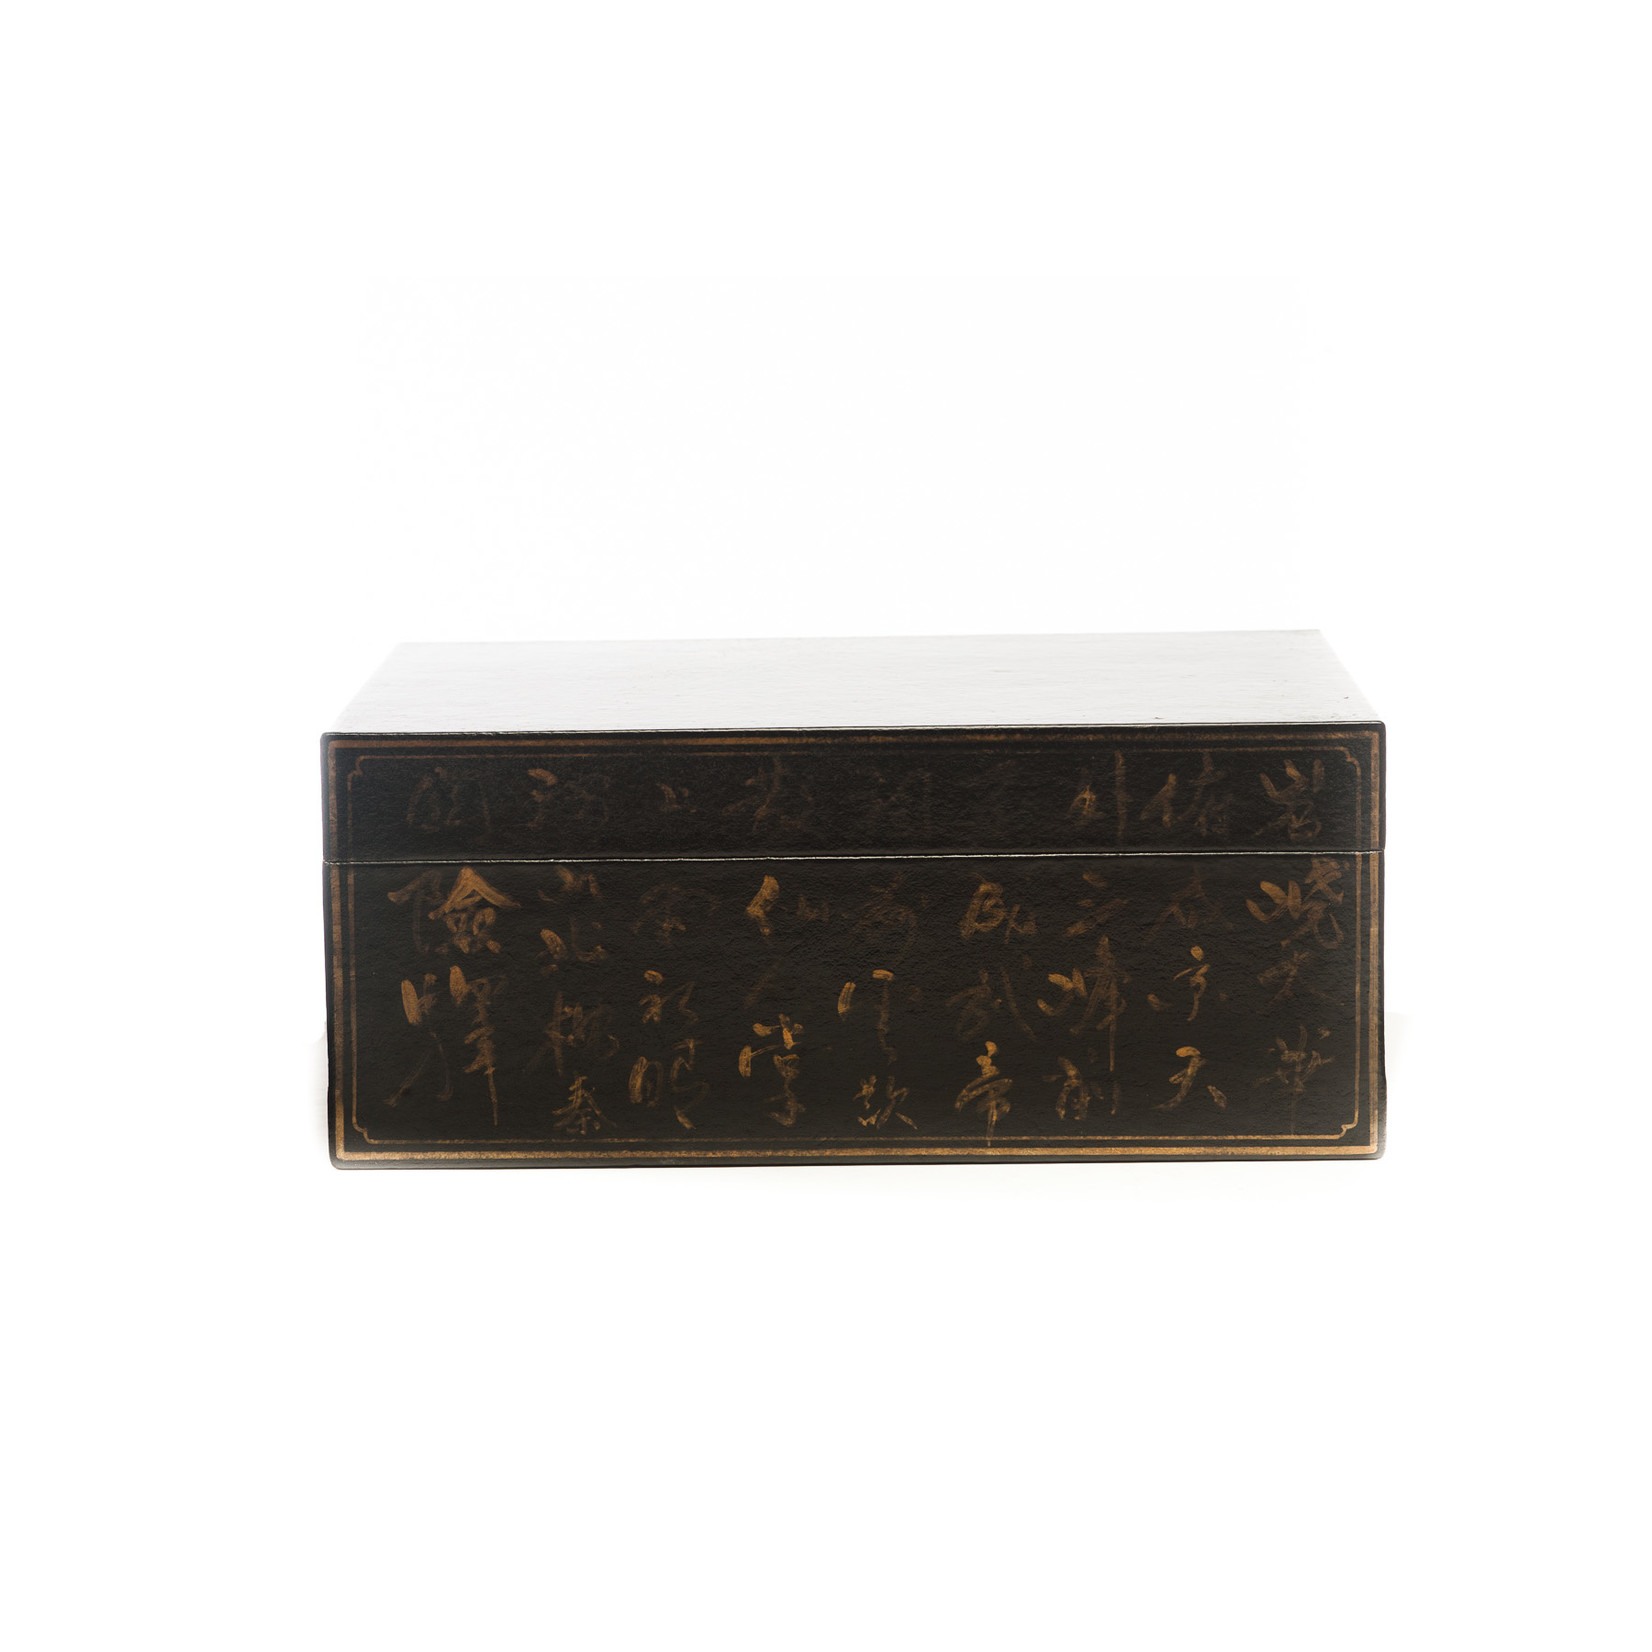 Lawrence & Scott Black Inscription Leather Box (16") with hand-painted Chinese poems